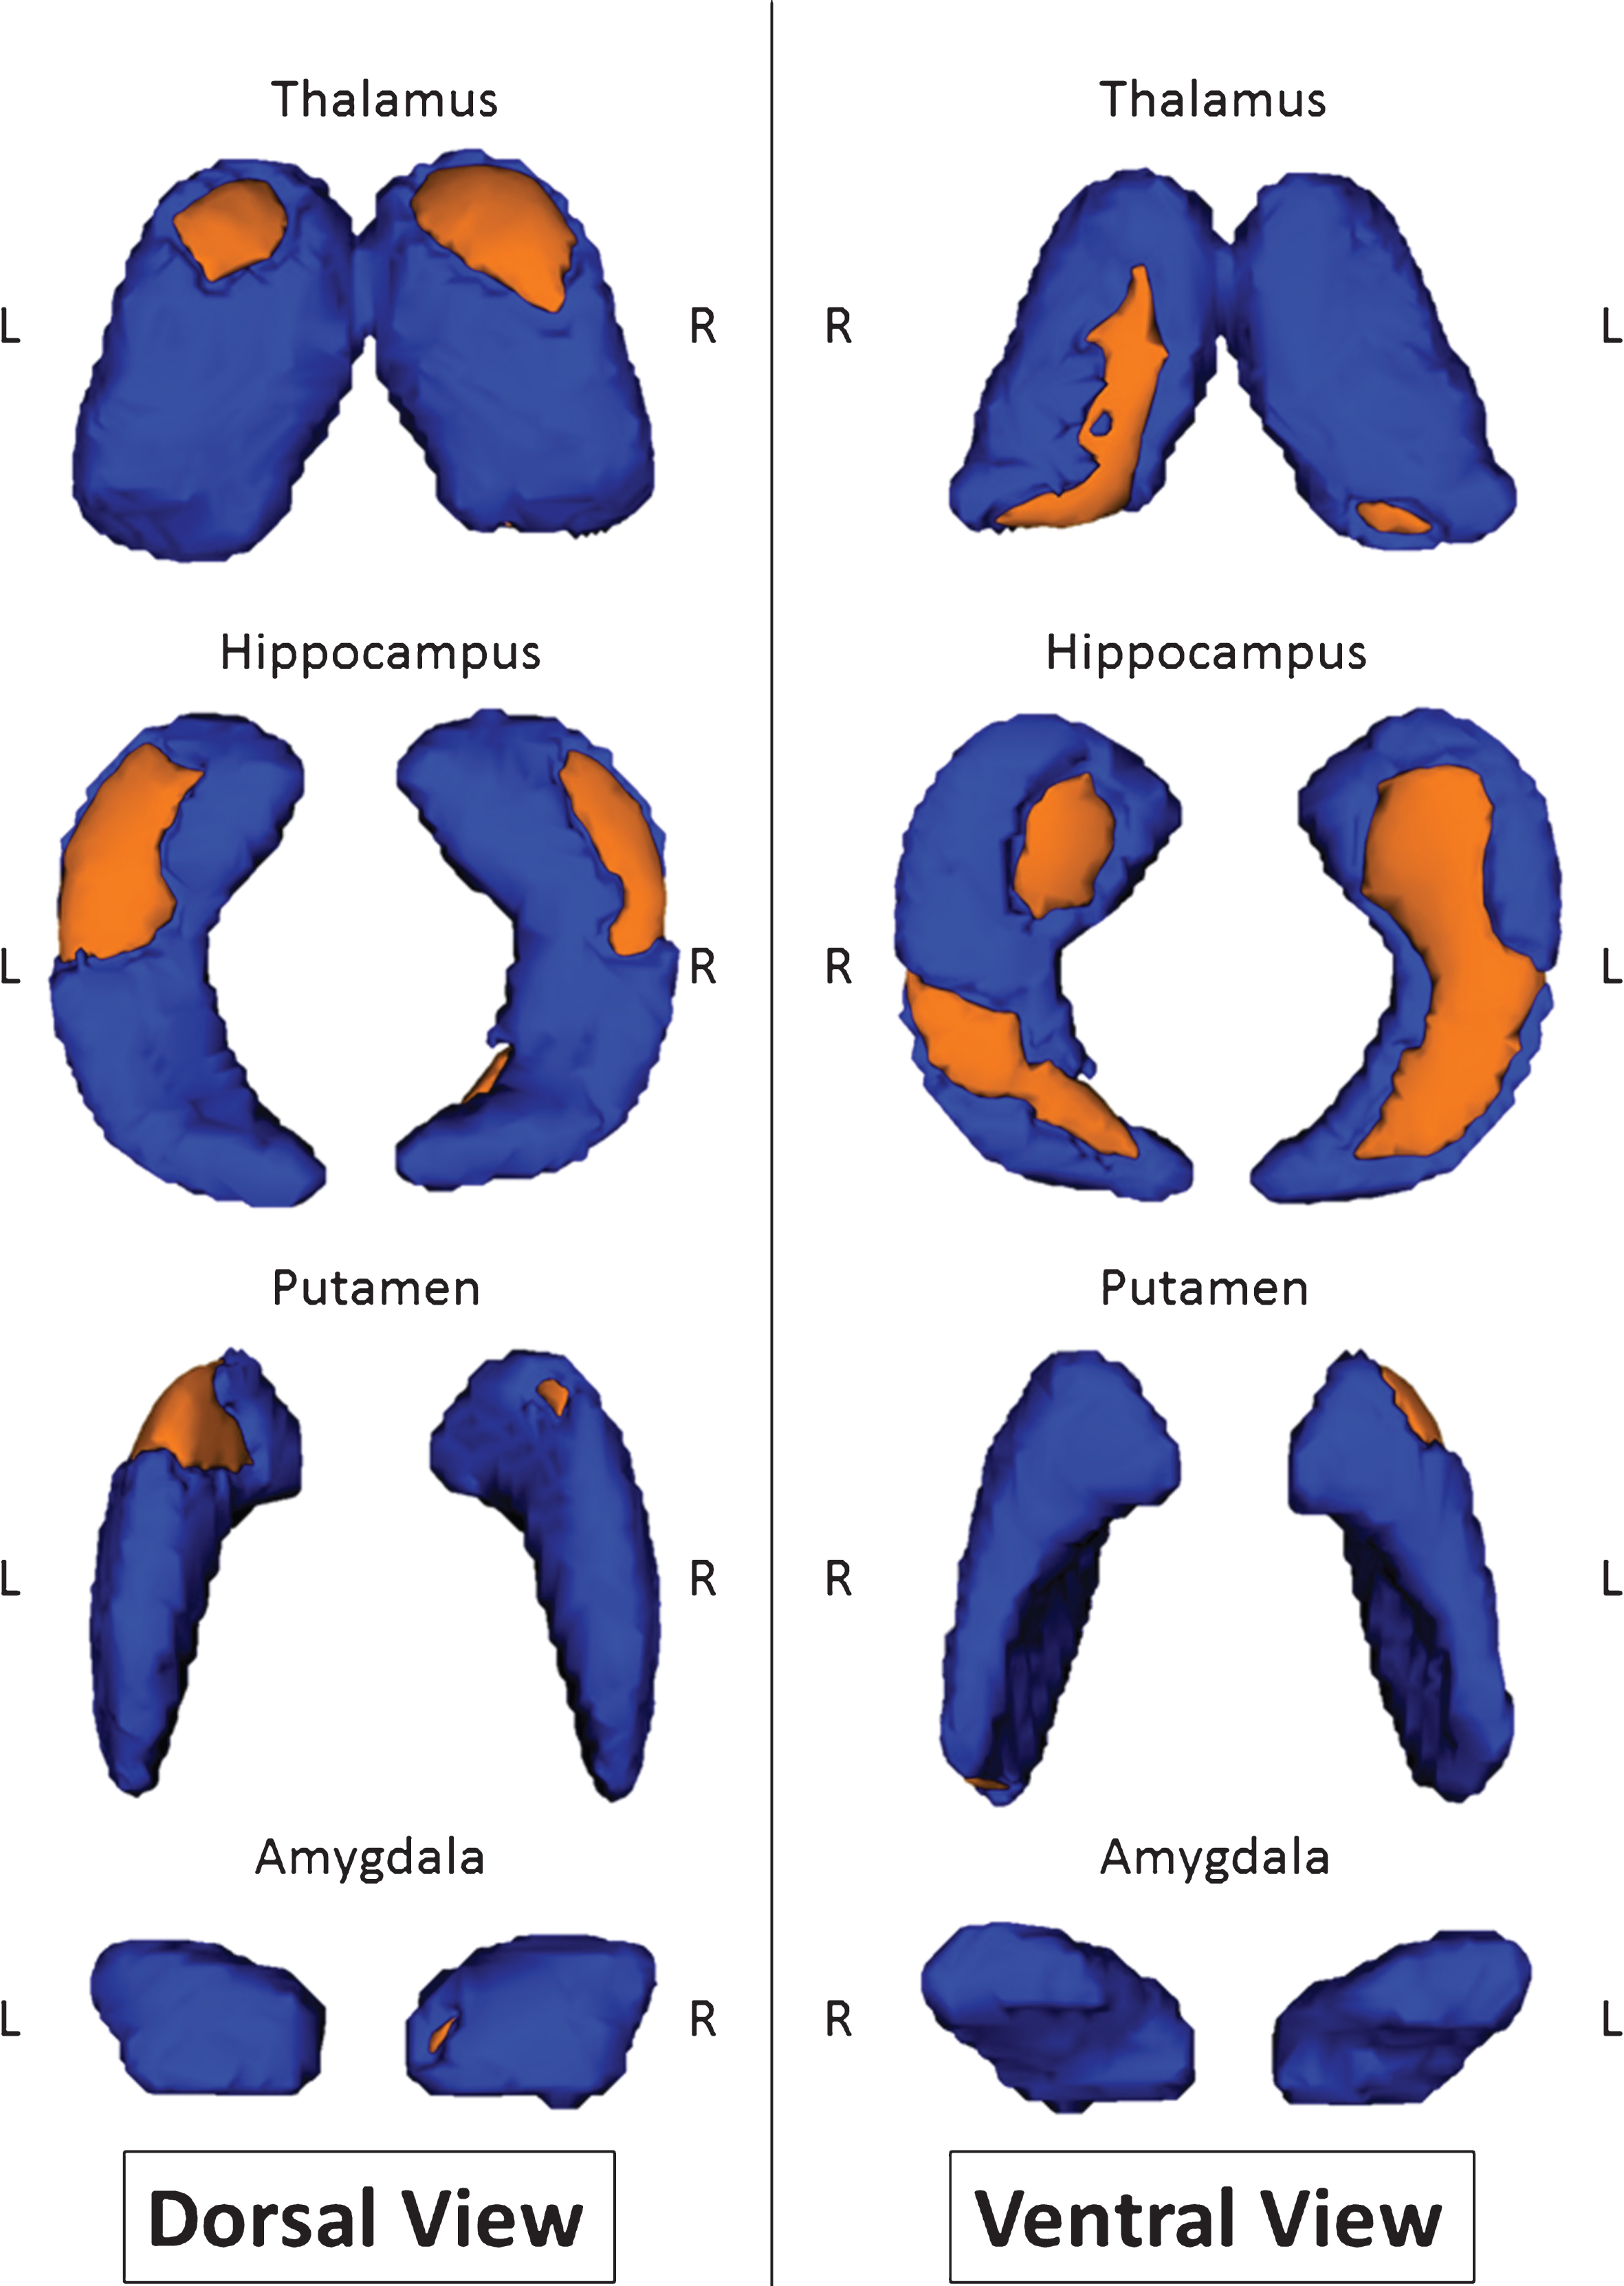 Shape modifications between MCI-due-to-AD patients and healthy controls in dorsal and ventral views. Areas in orange represent localization with significant shape modification (p <  0.05 corrected for multiple comparisons).